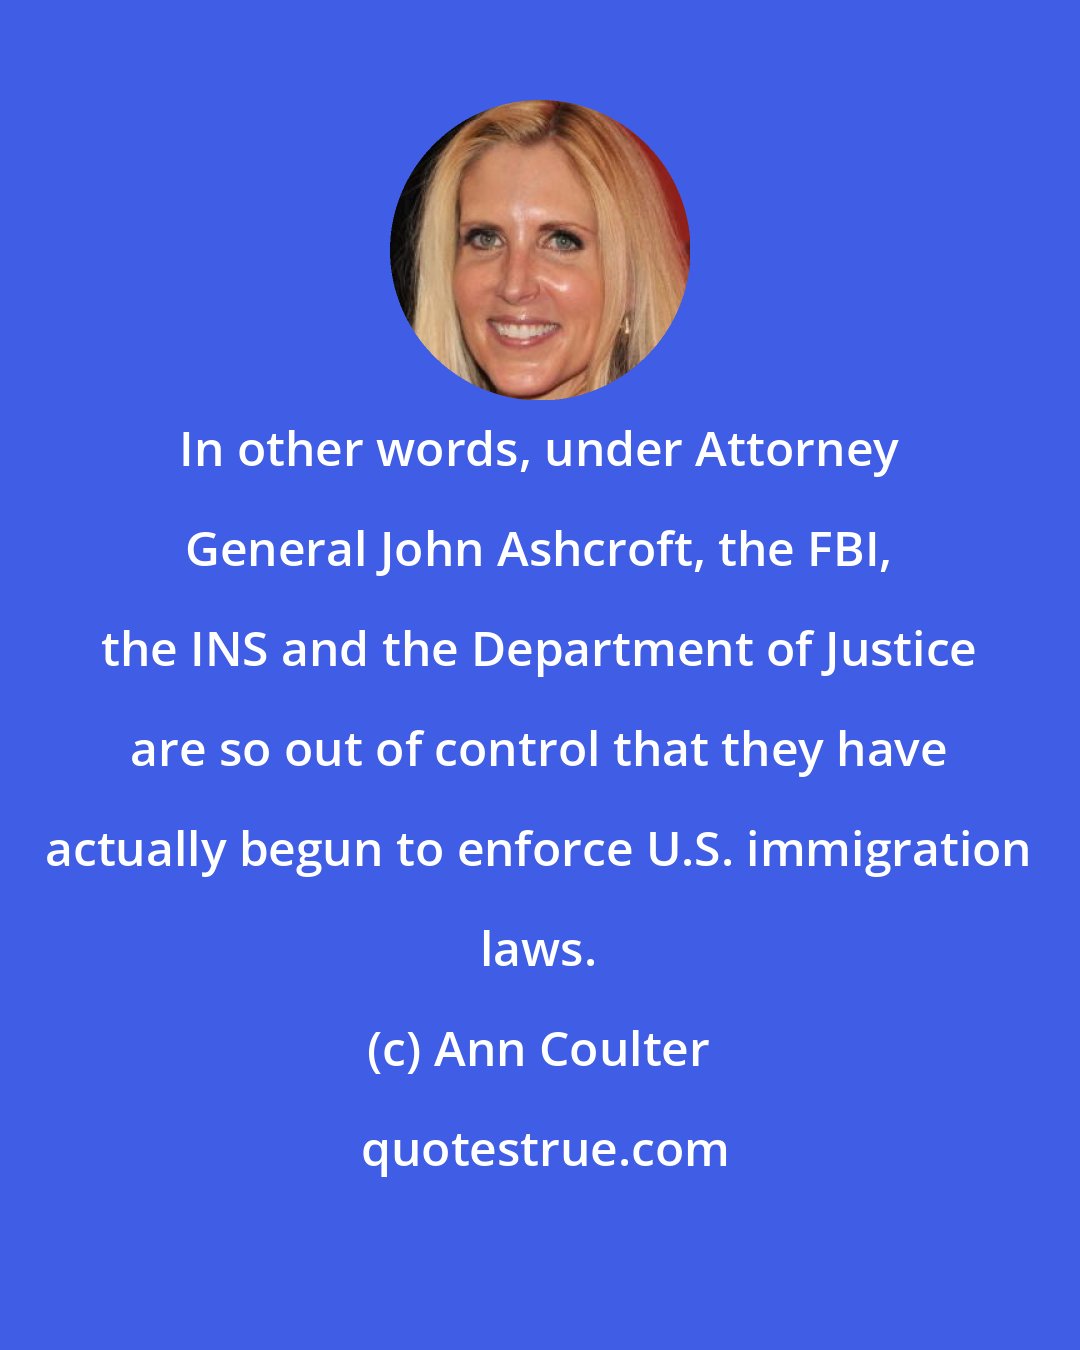 Ann Coulter: In other words, under Attorney General John Ashcroft, the FBI, the INS and the Department of Justice are so out of control that they have actually begun to enforce U.S. immigration laws.